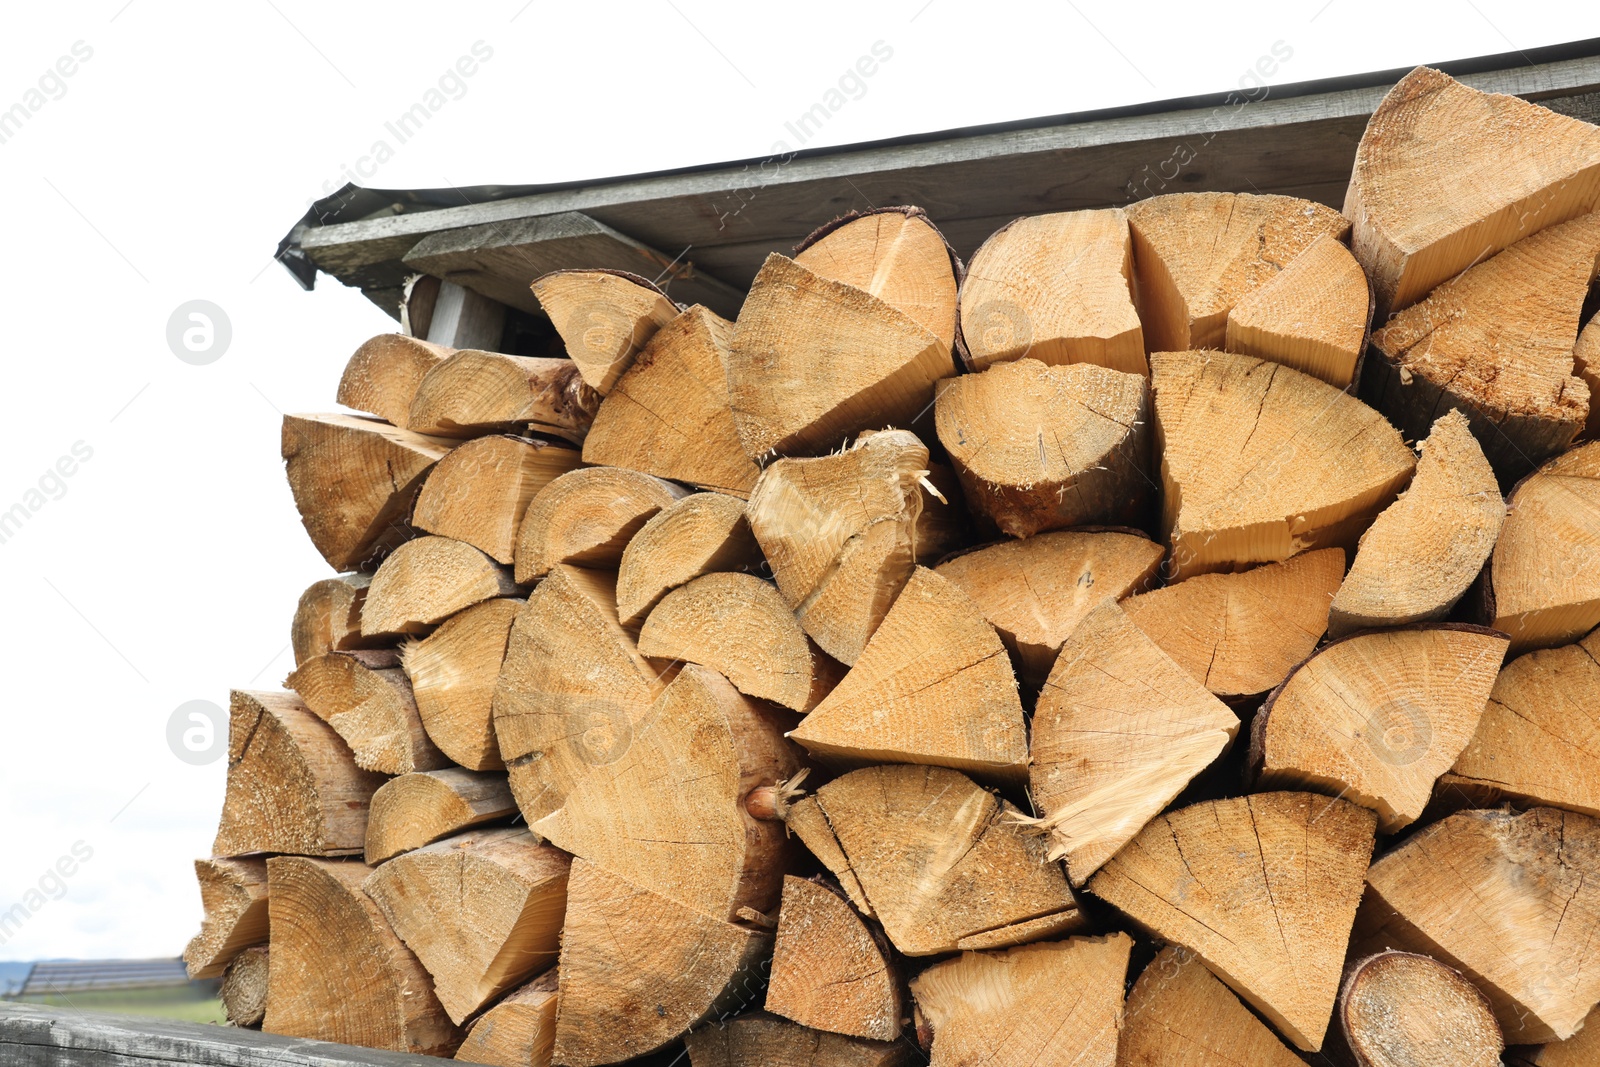 Photo of Pile of chopped firewood under roof outdoors